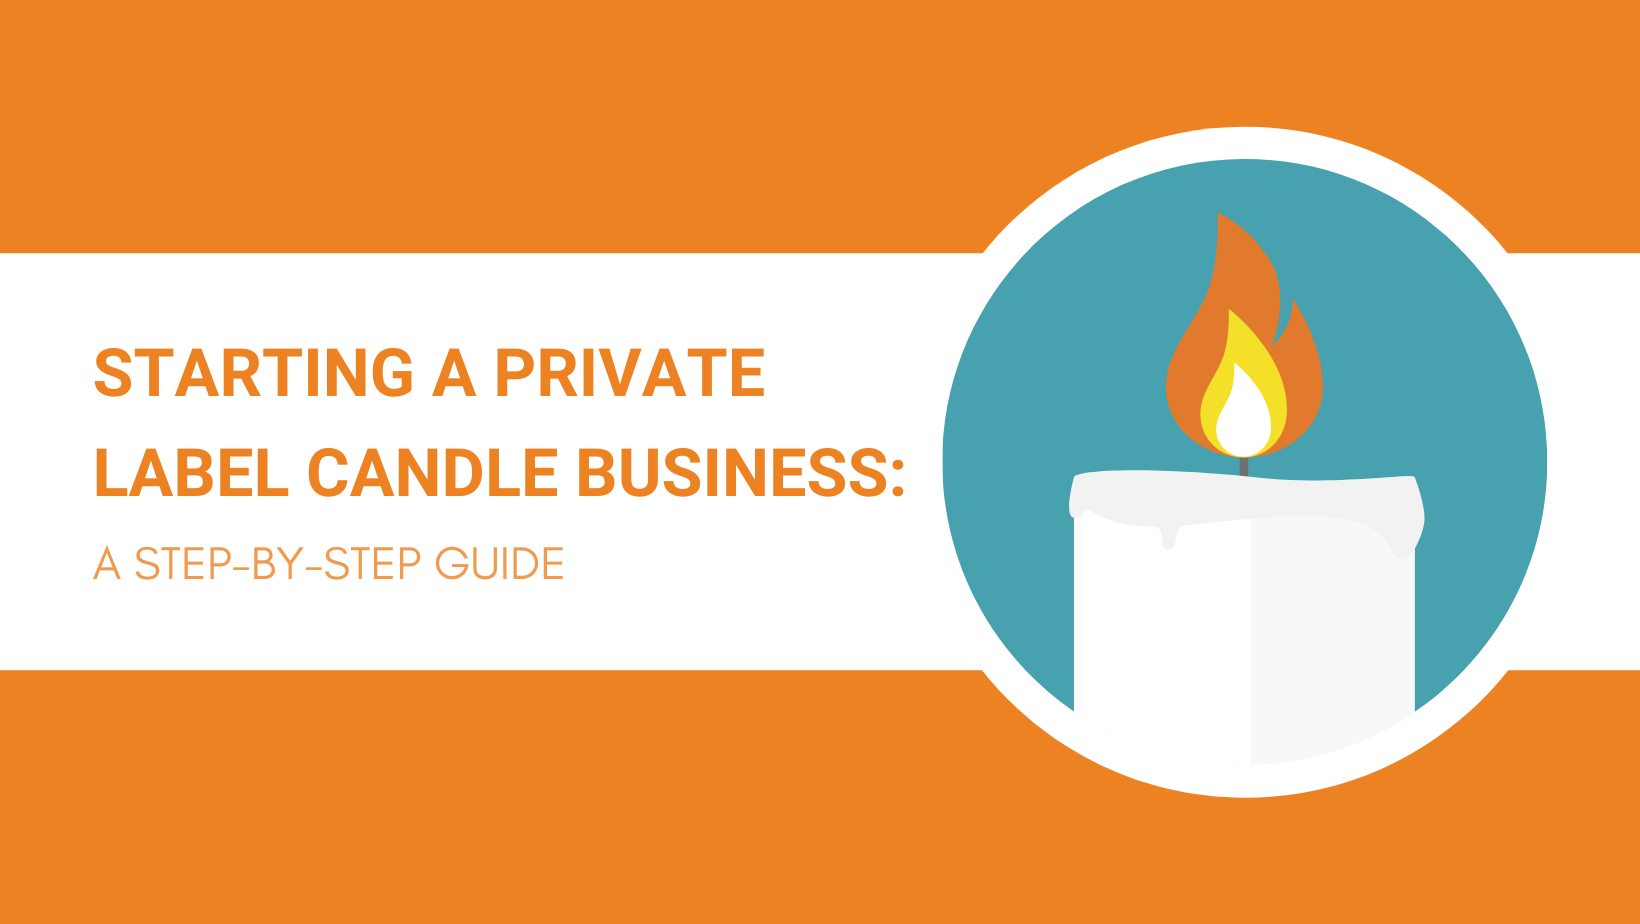 Starting a Private Label Candle Business in 2023: A Step-By-Step Guide